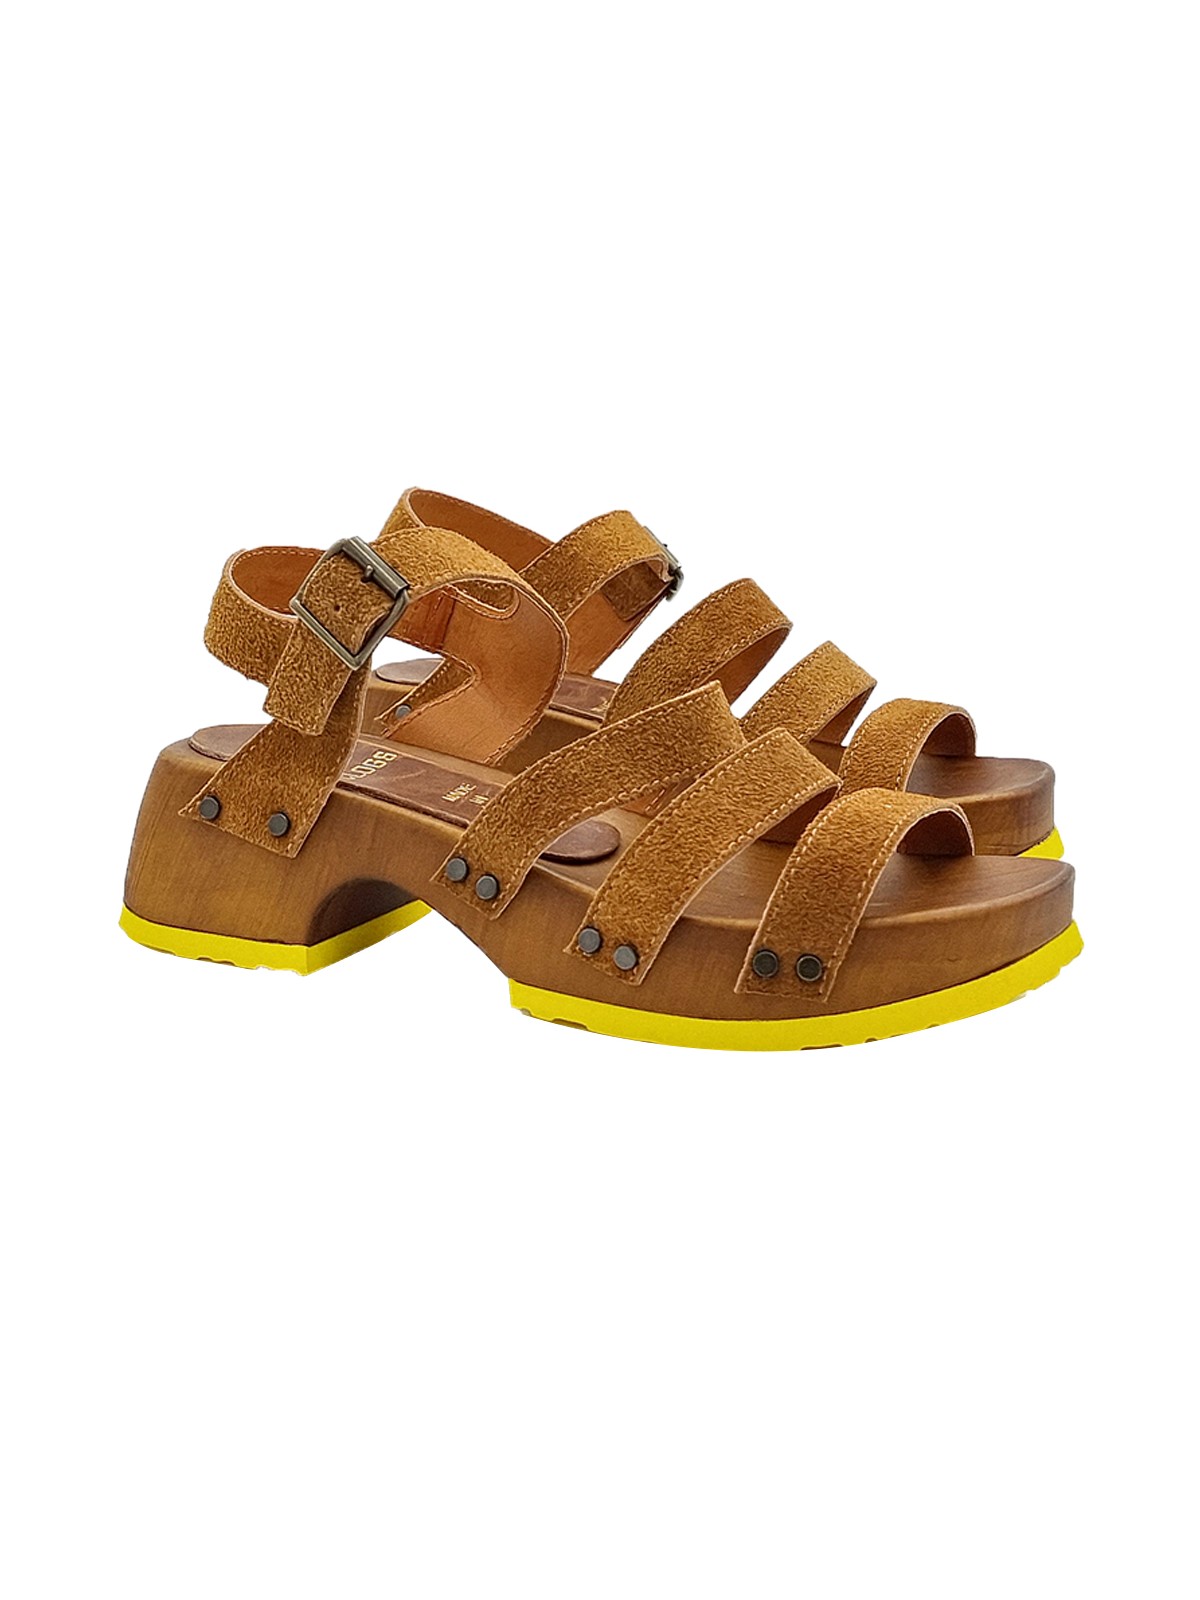 LEATHER SANDALS WITH SUEDE BANDS AND STRAP